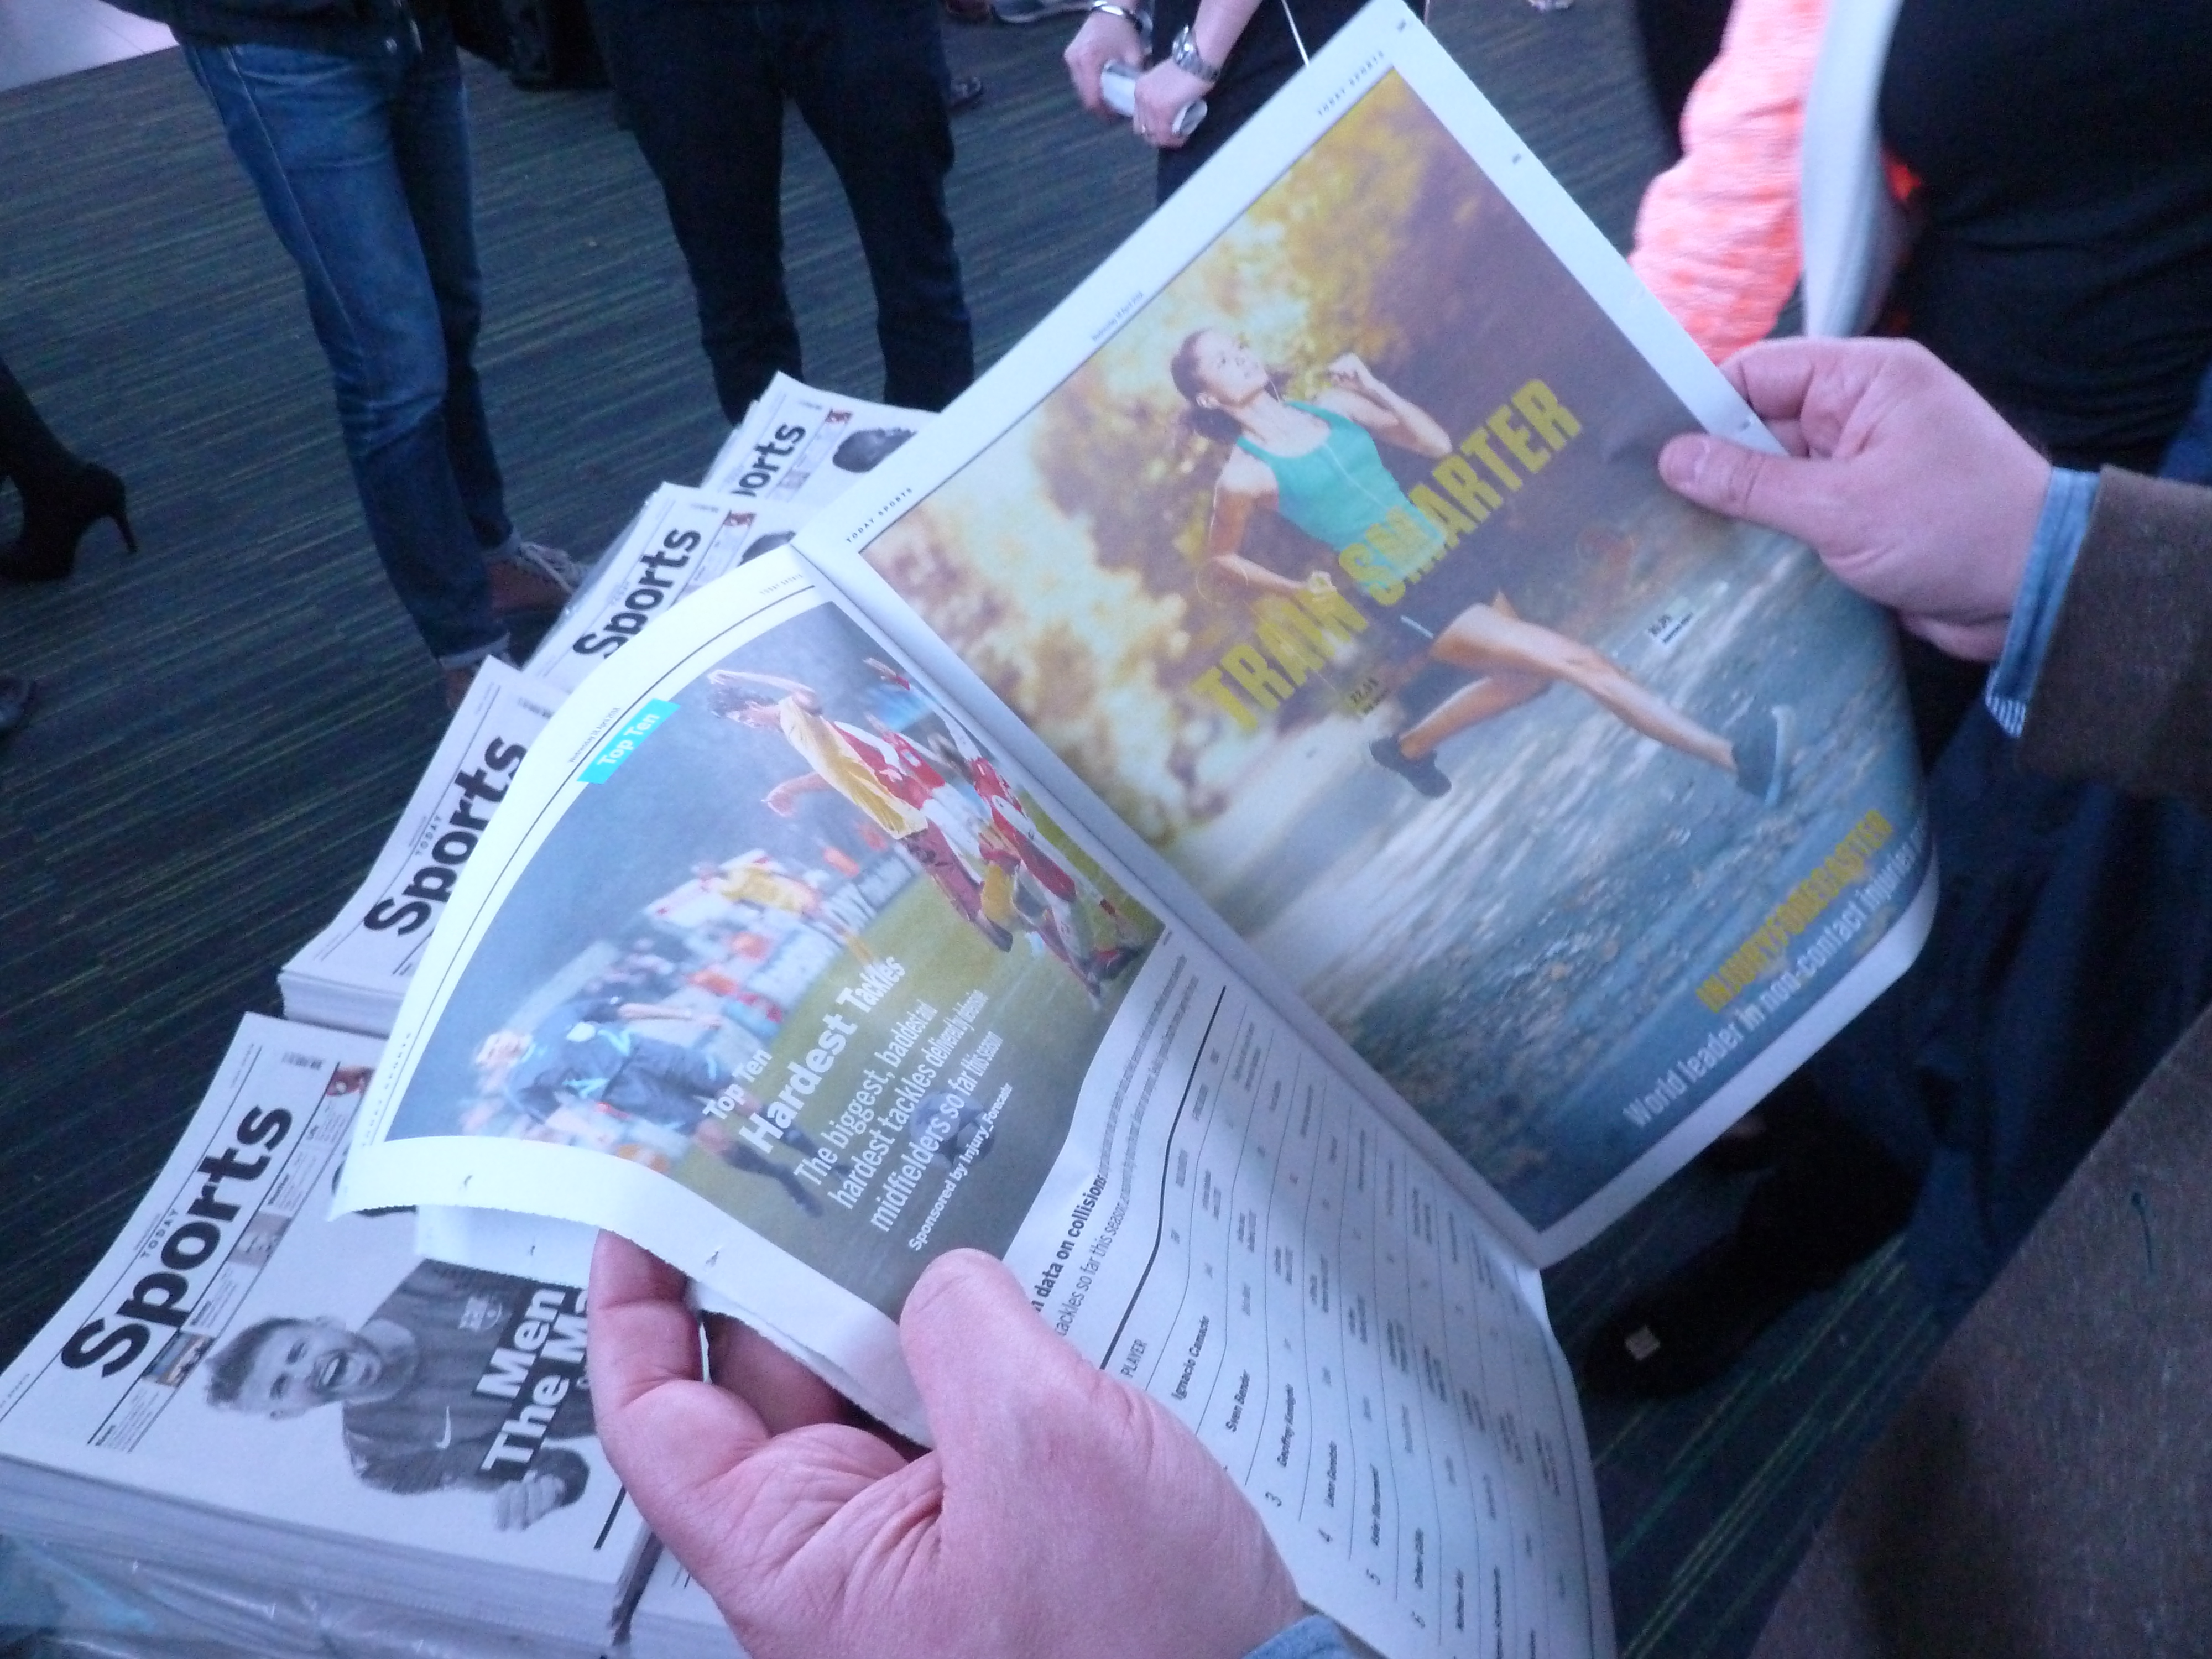 Winning Formula a Design Fiction newspaper from the future in the hands of some construction workers